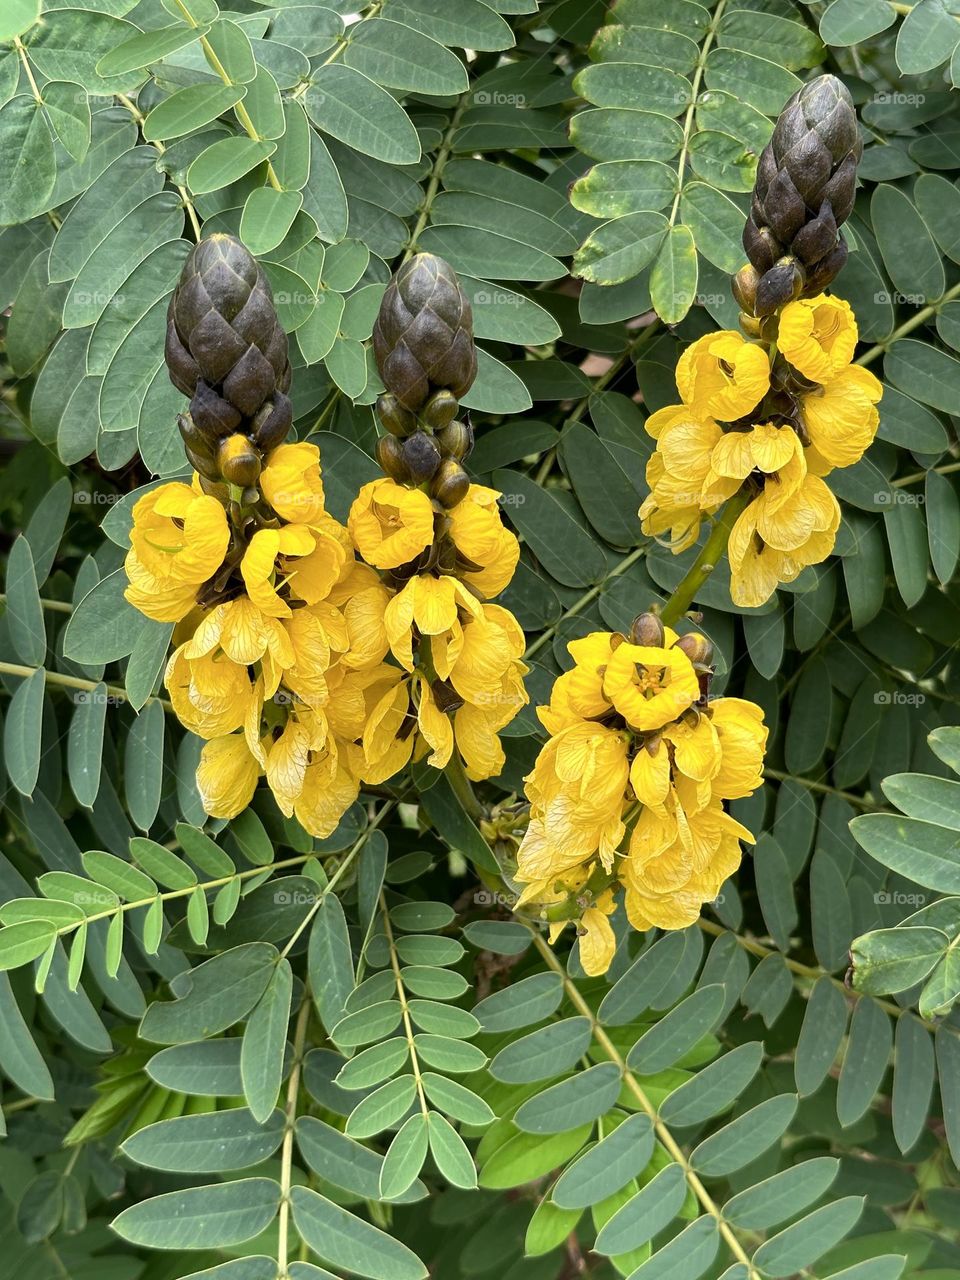 A yellow and bright flower surrounded by green leaves known as a African Senna is a ornamental plant 